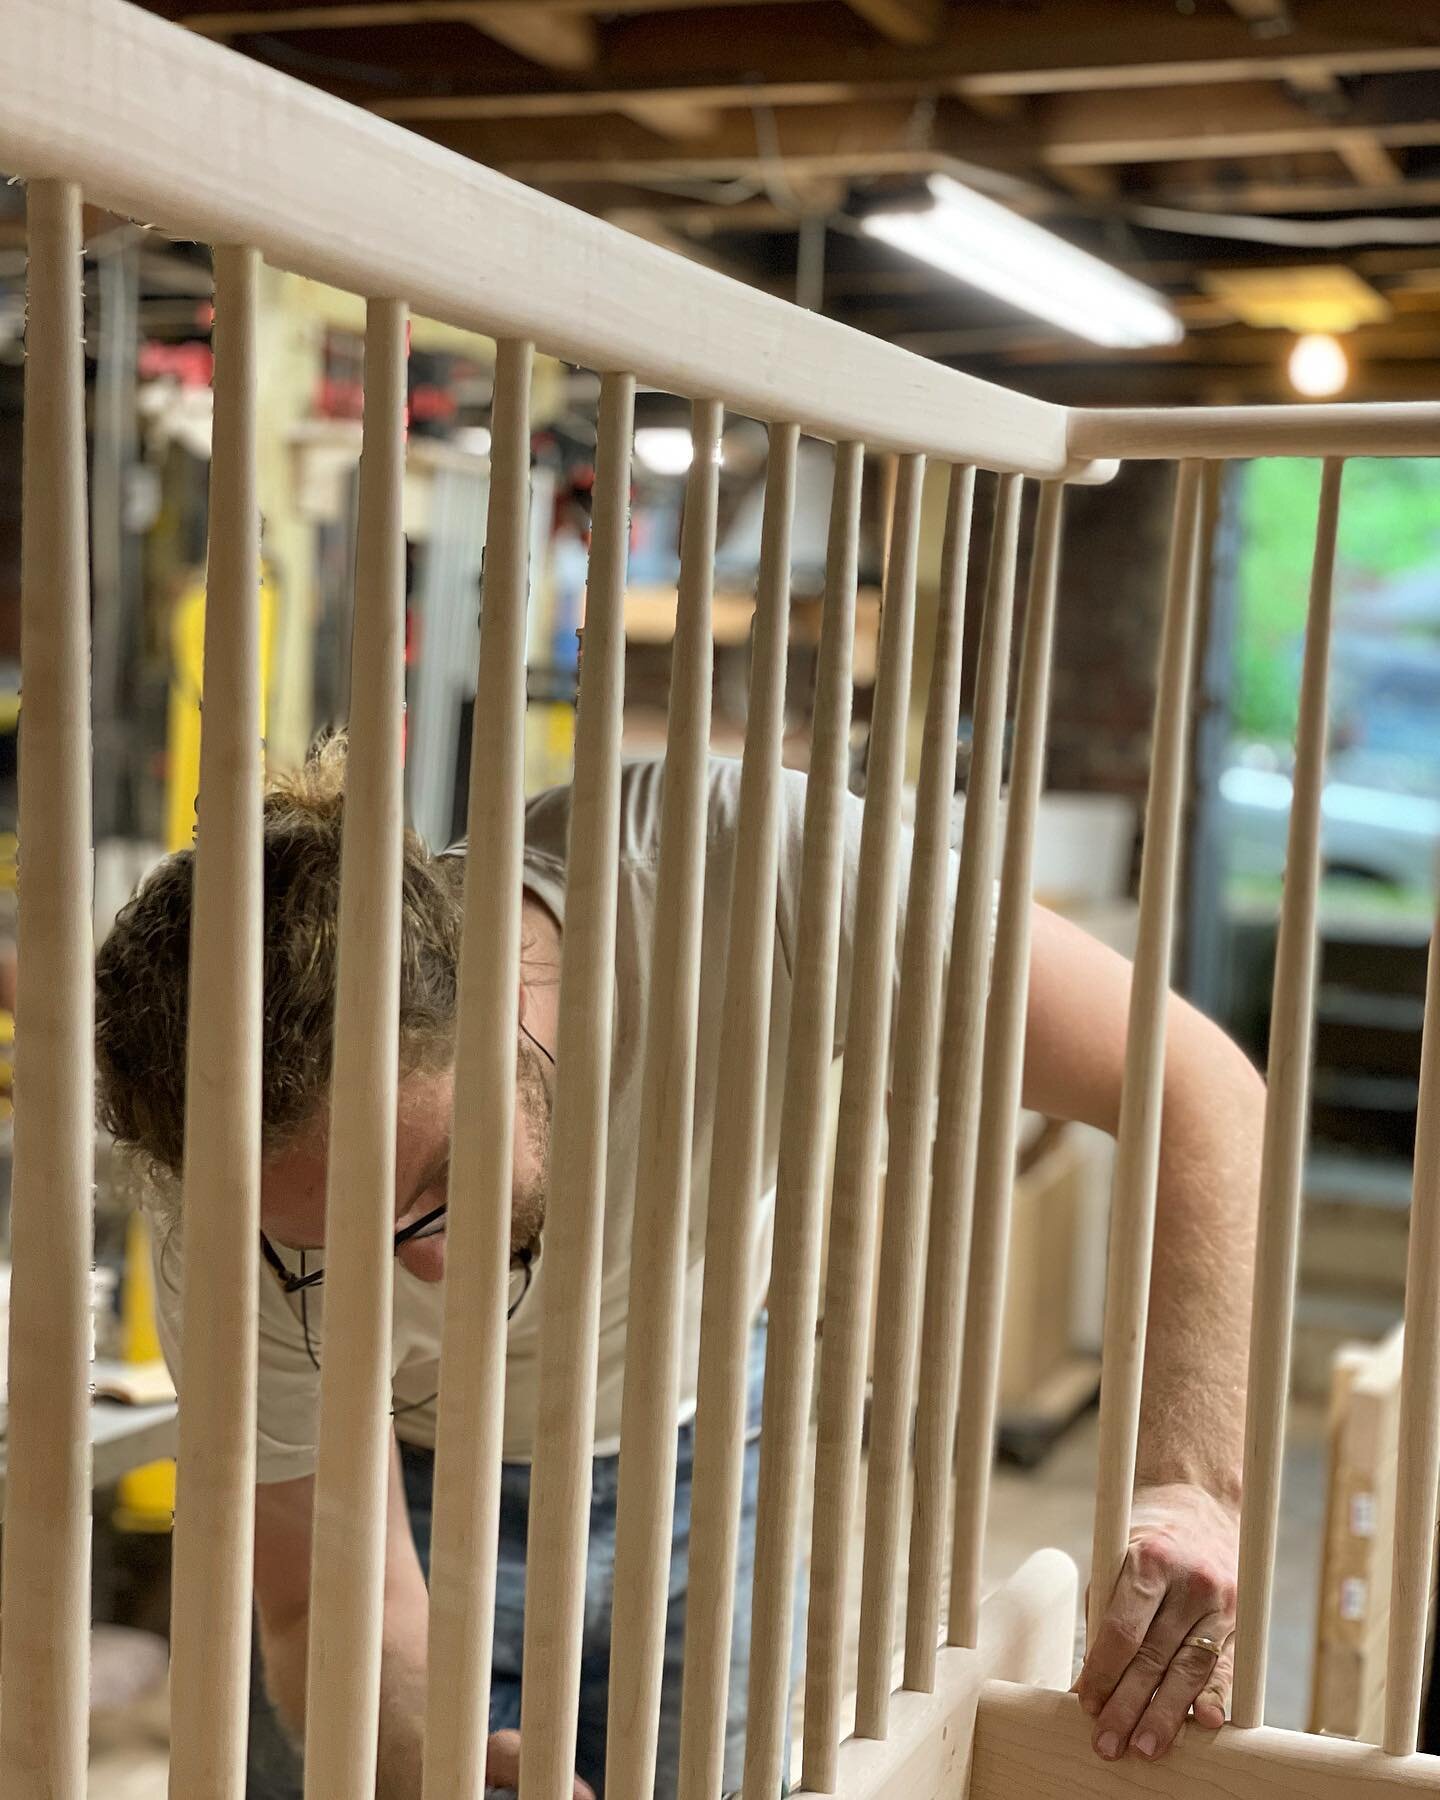 Sanding and preparing each surface, curve and edge takes dedication and an eye for detail that can&rsquo;t be rushed. Enjoy the process. 
.
.
.
#crib #finefurniture #furnituredesign #curlymaple #maple #nursery #sanding #woodworking #wood #bham #birmi